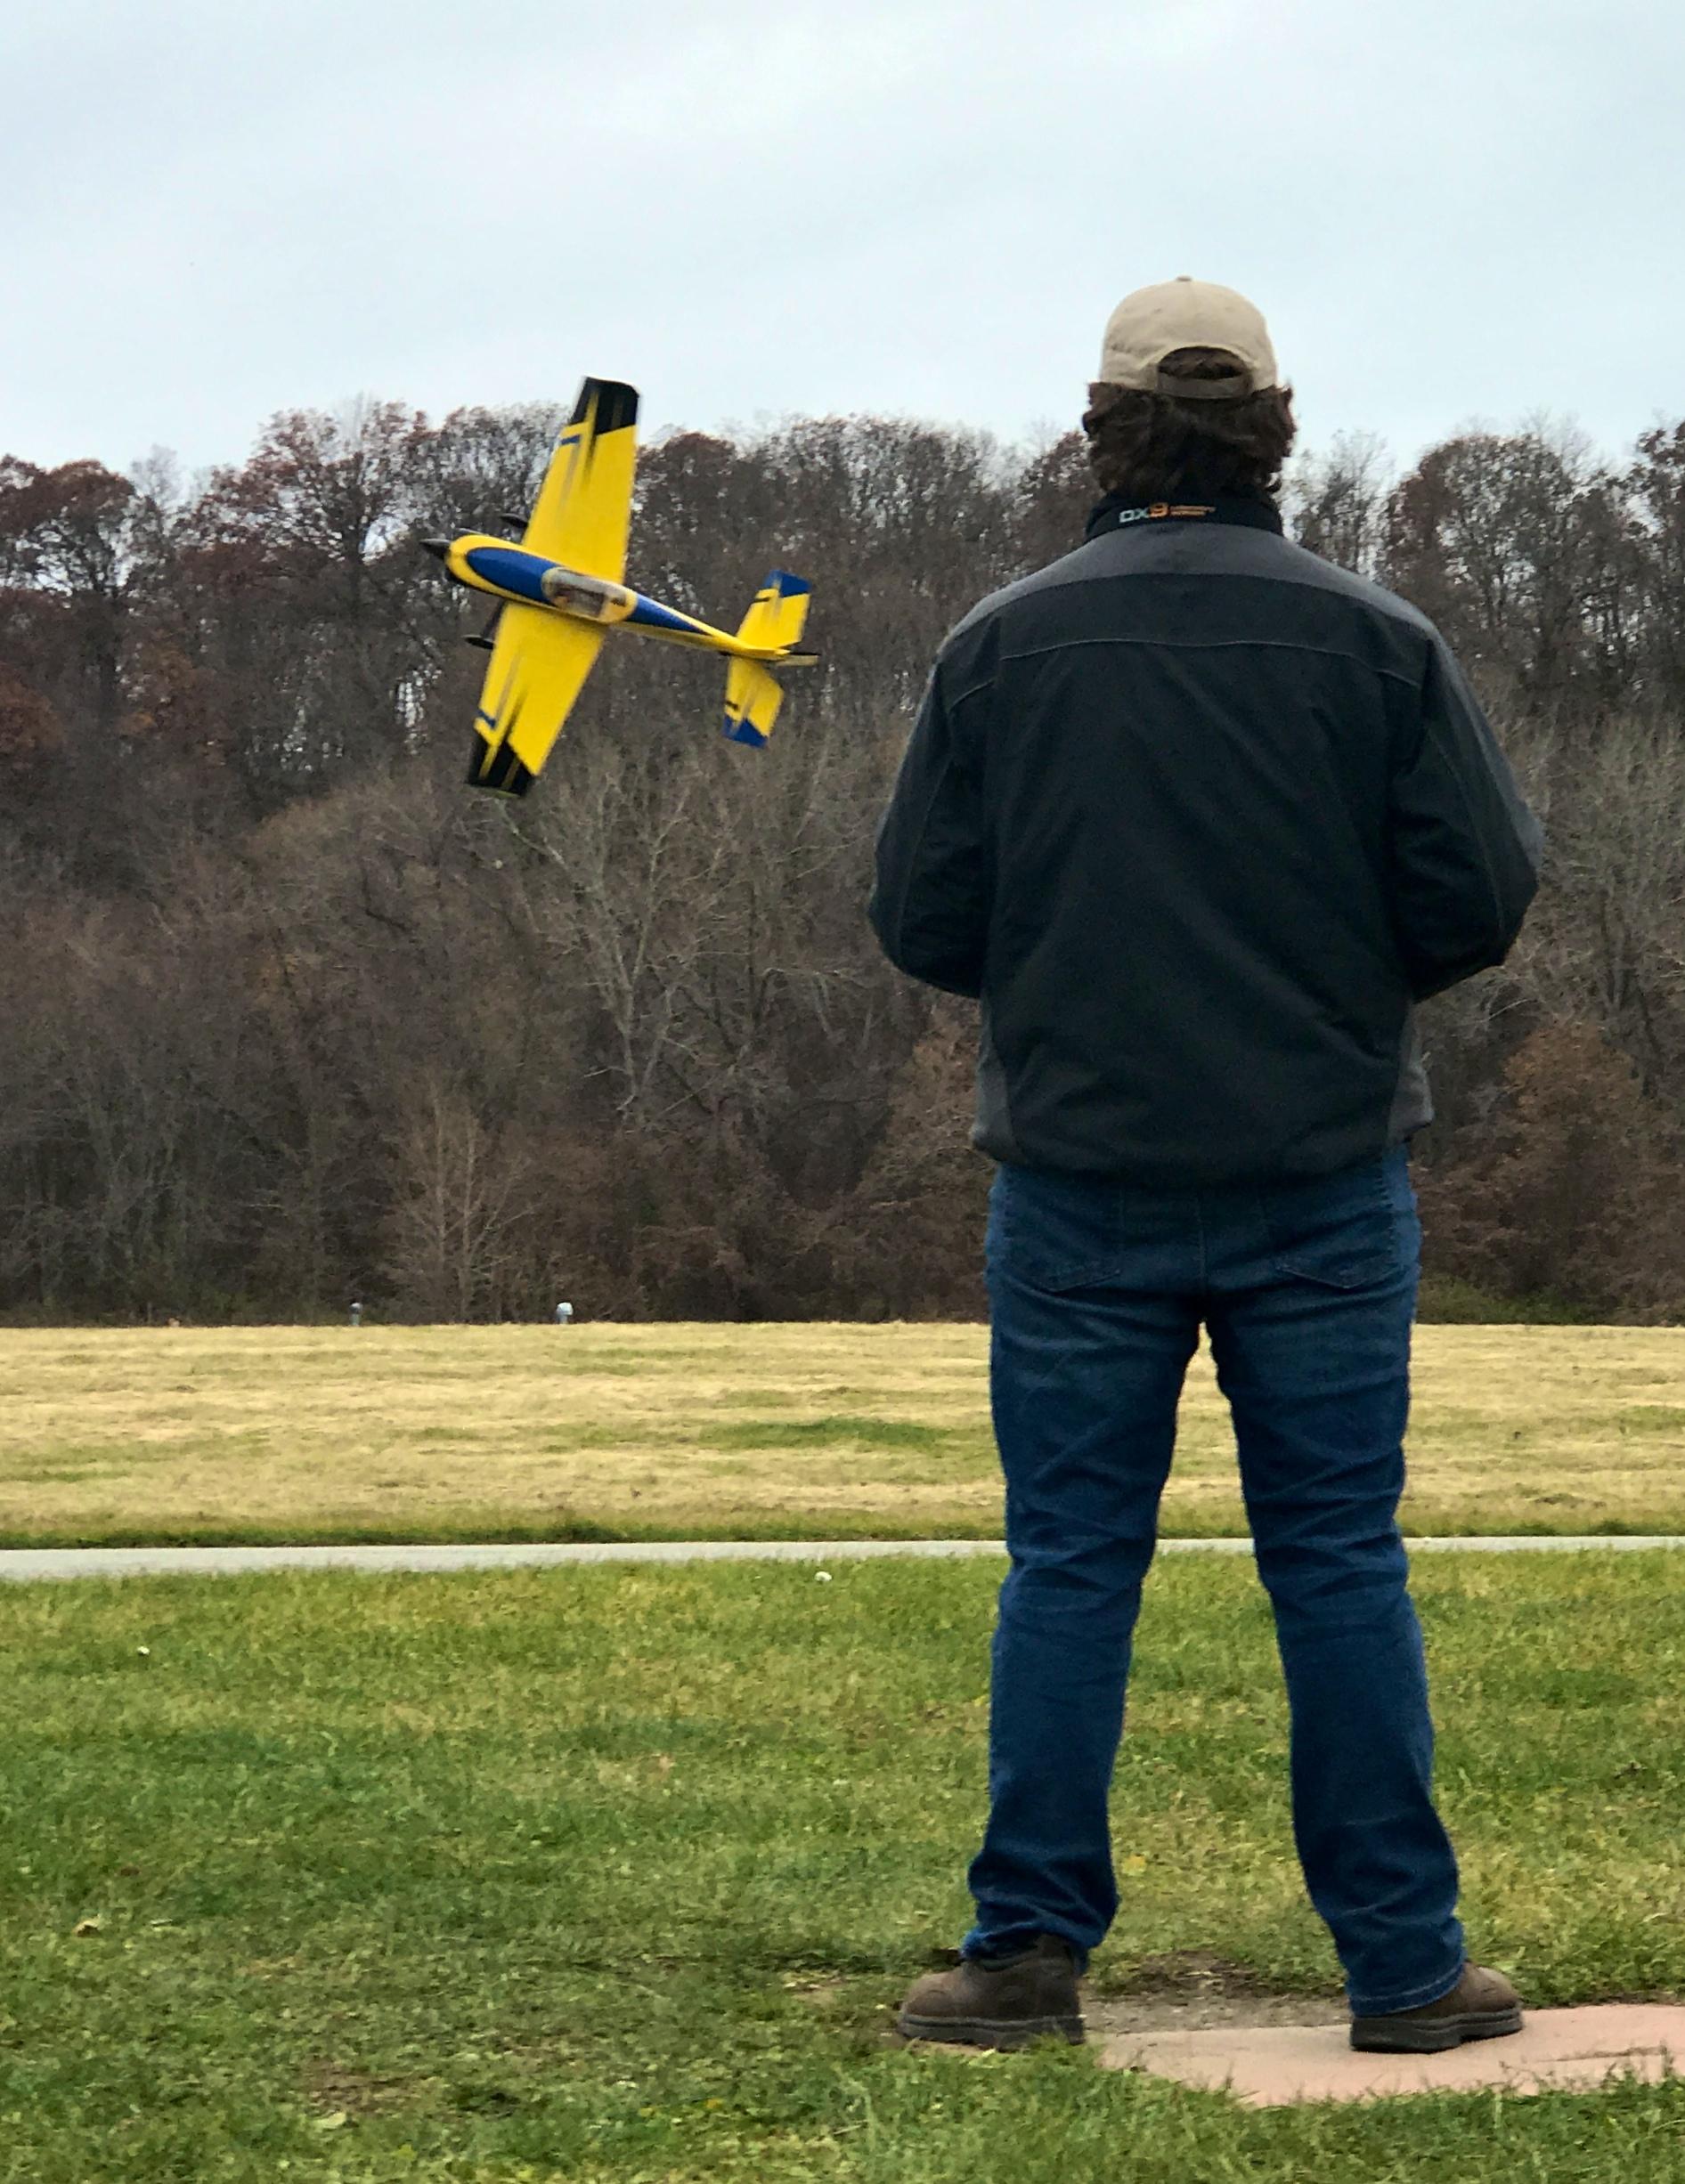 Fly Rc Planes Near Me: Finding nearby RC flying locations made easy